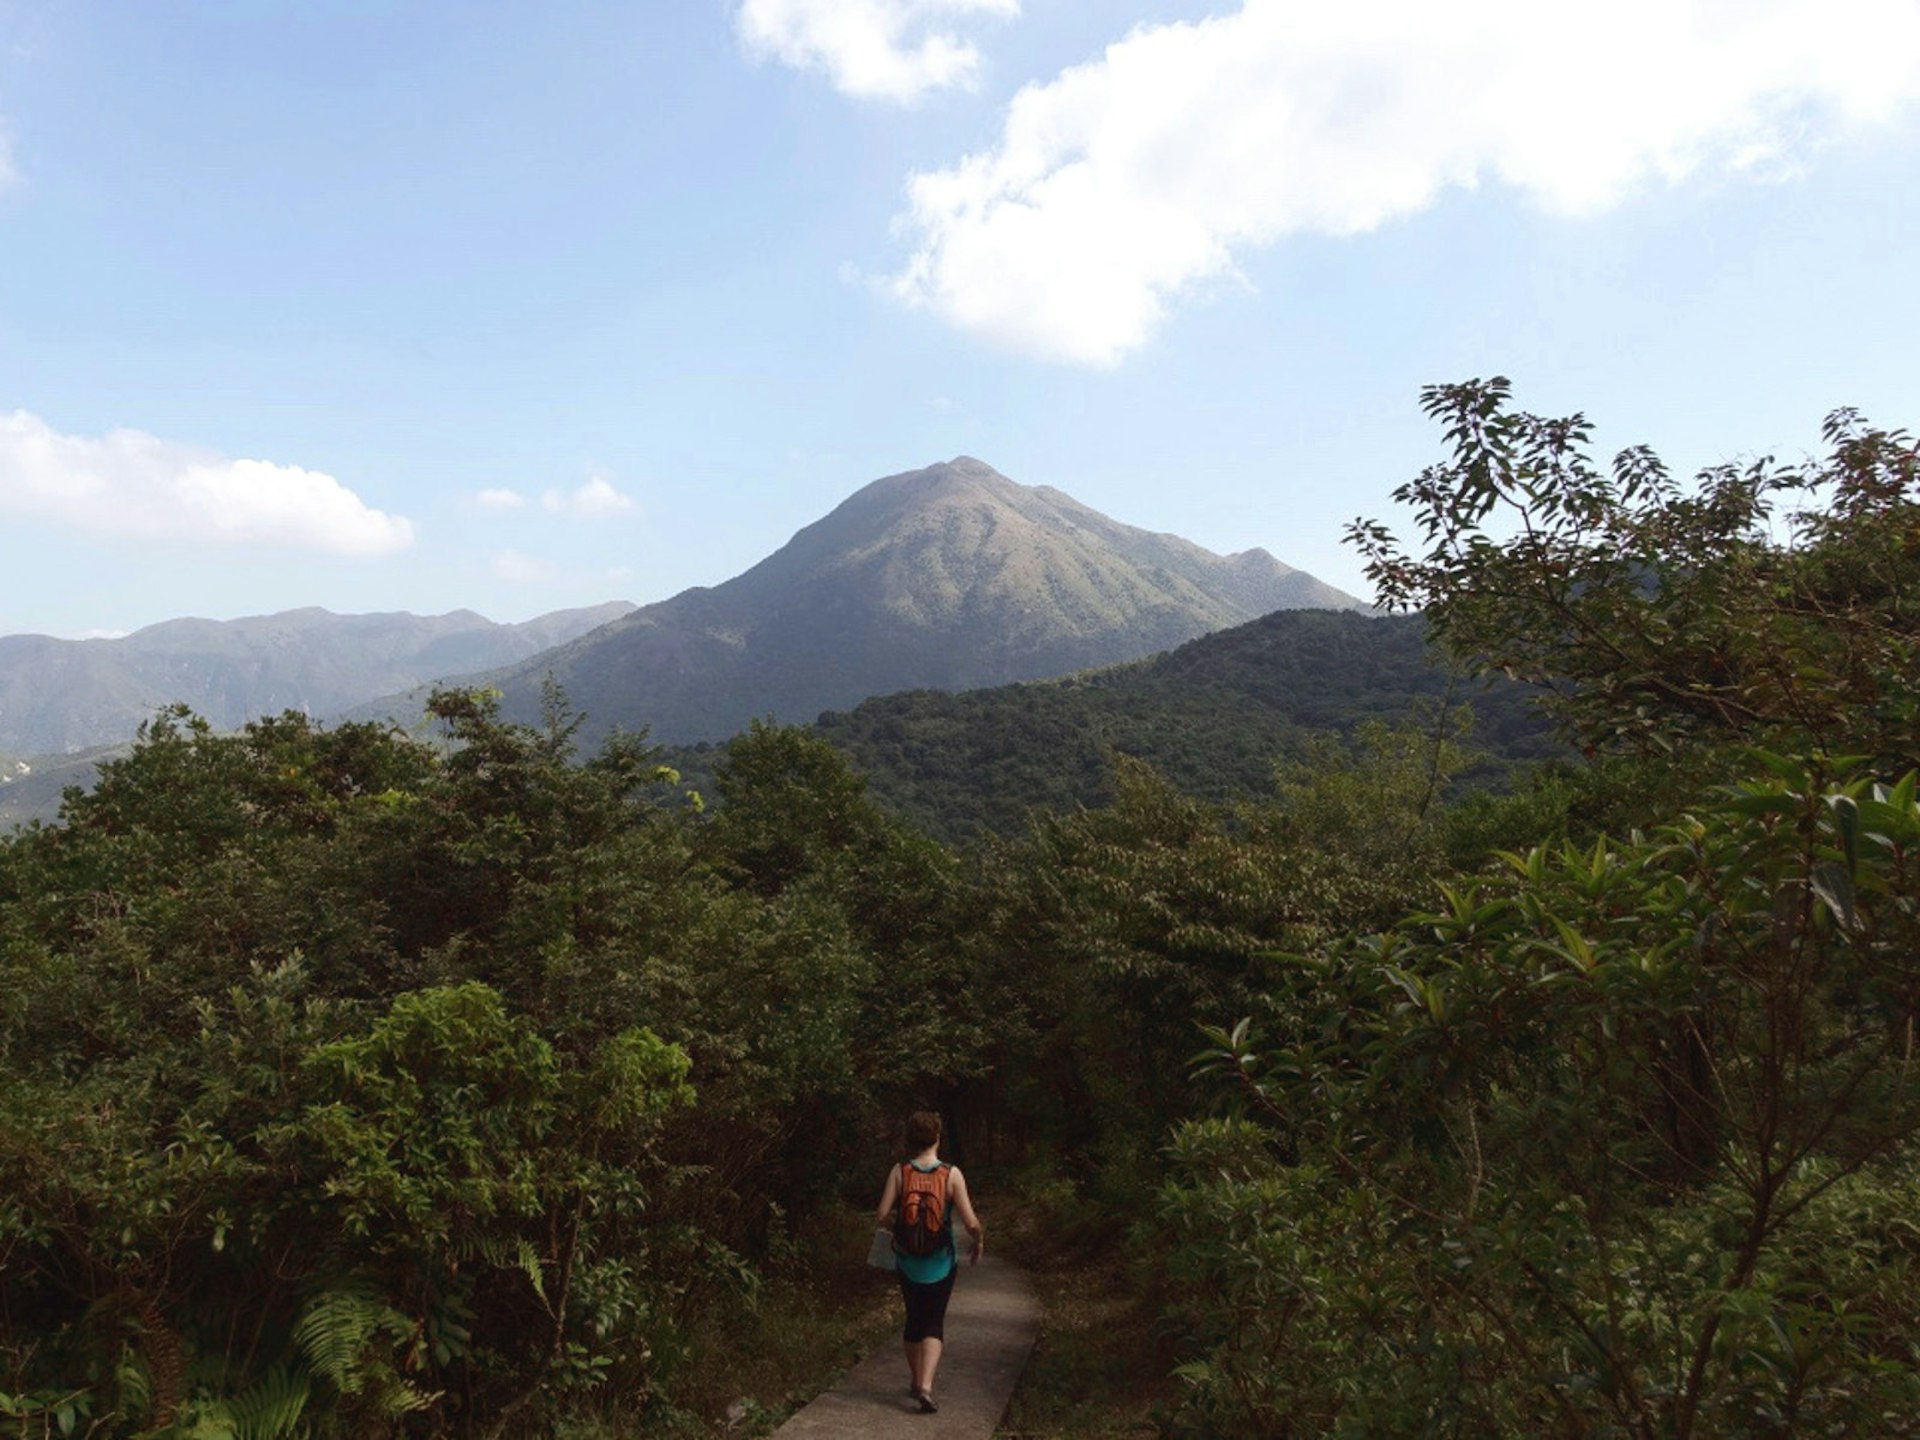 Hiking in the shadow of Lantau Peak is challenging and rewarding © Tess Humphrys / Lonely Planet